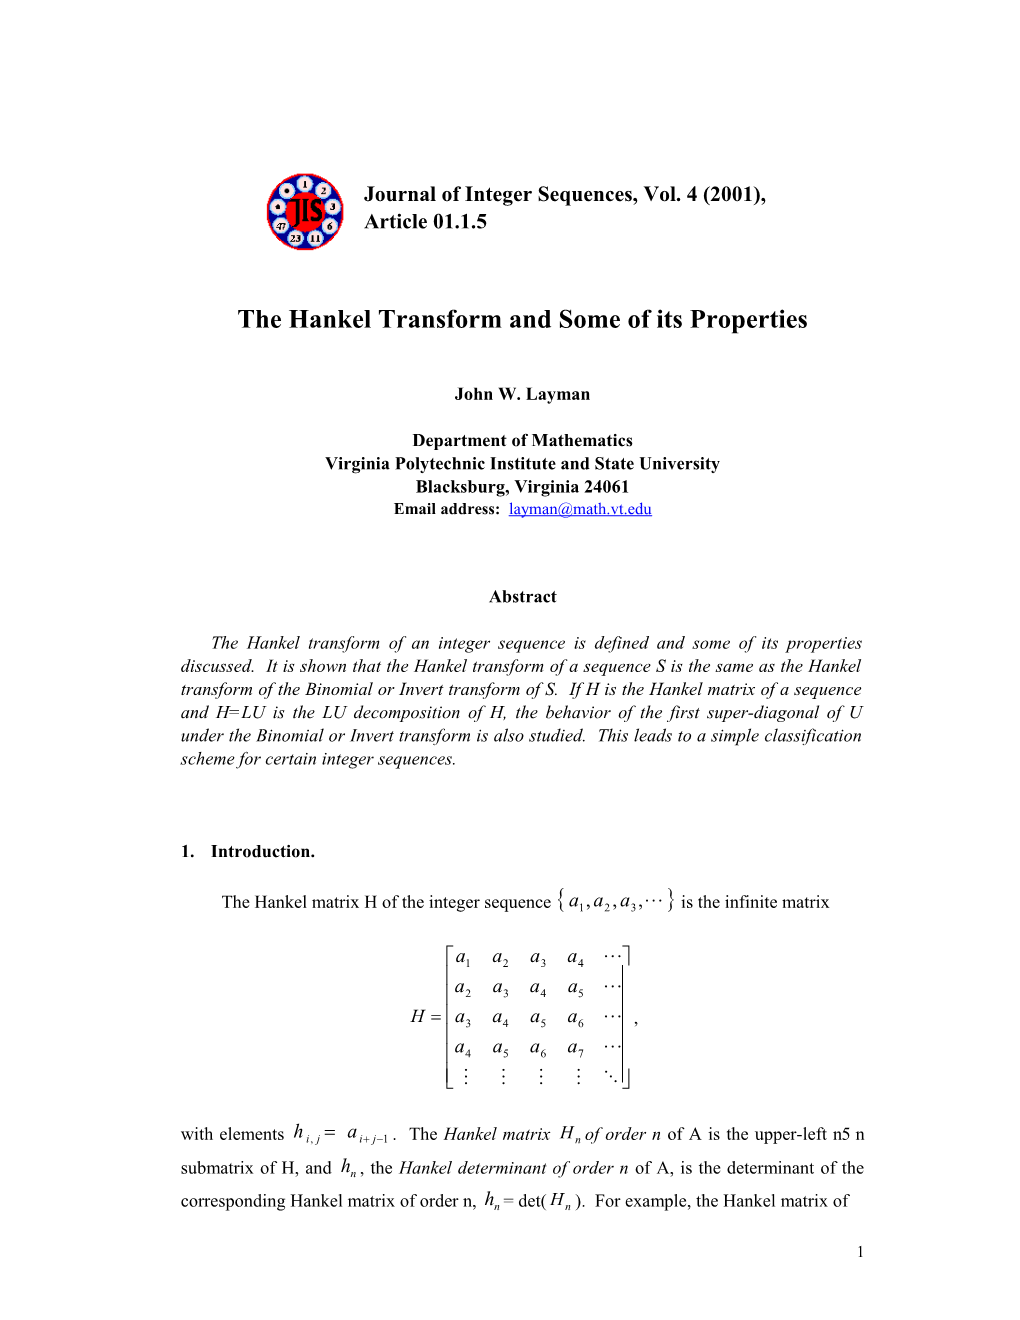 The Hankel Transform and Some of Its Properties